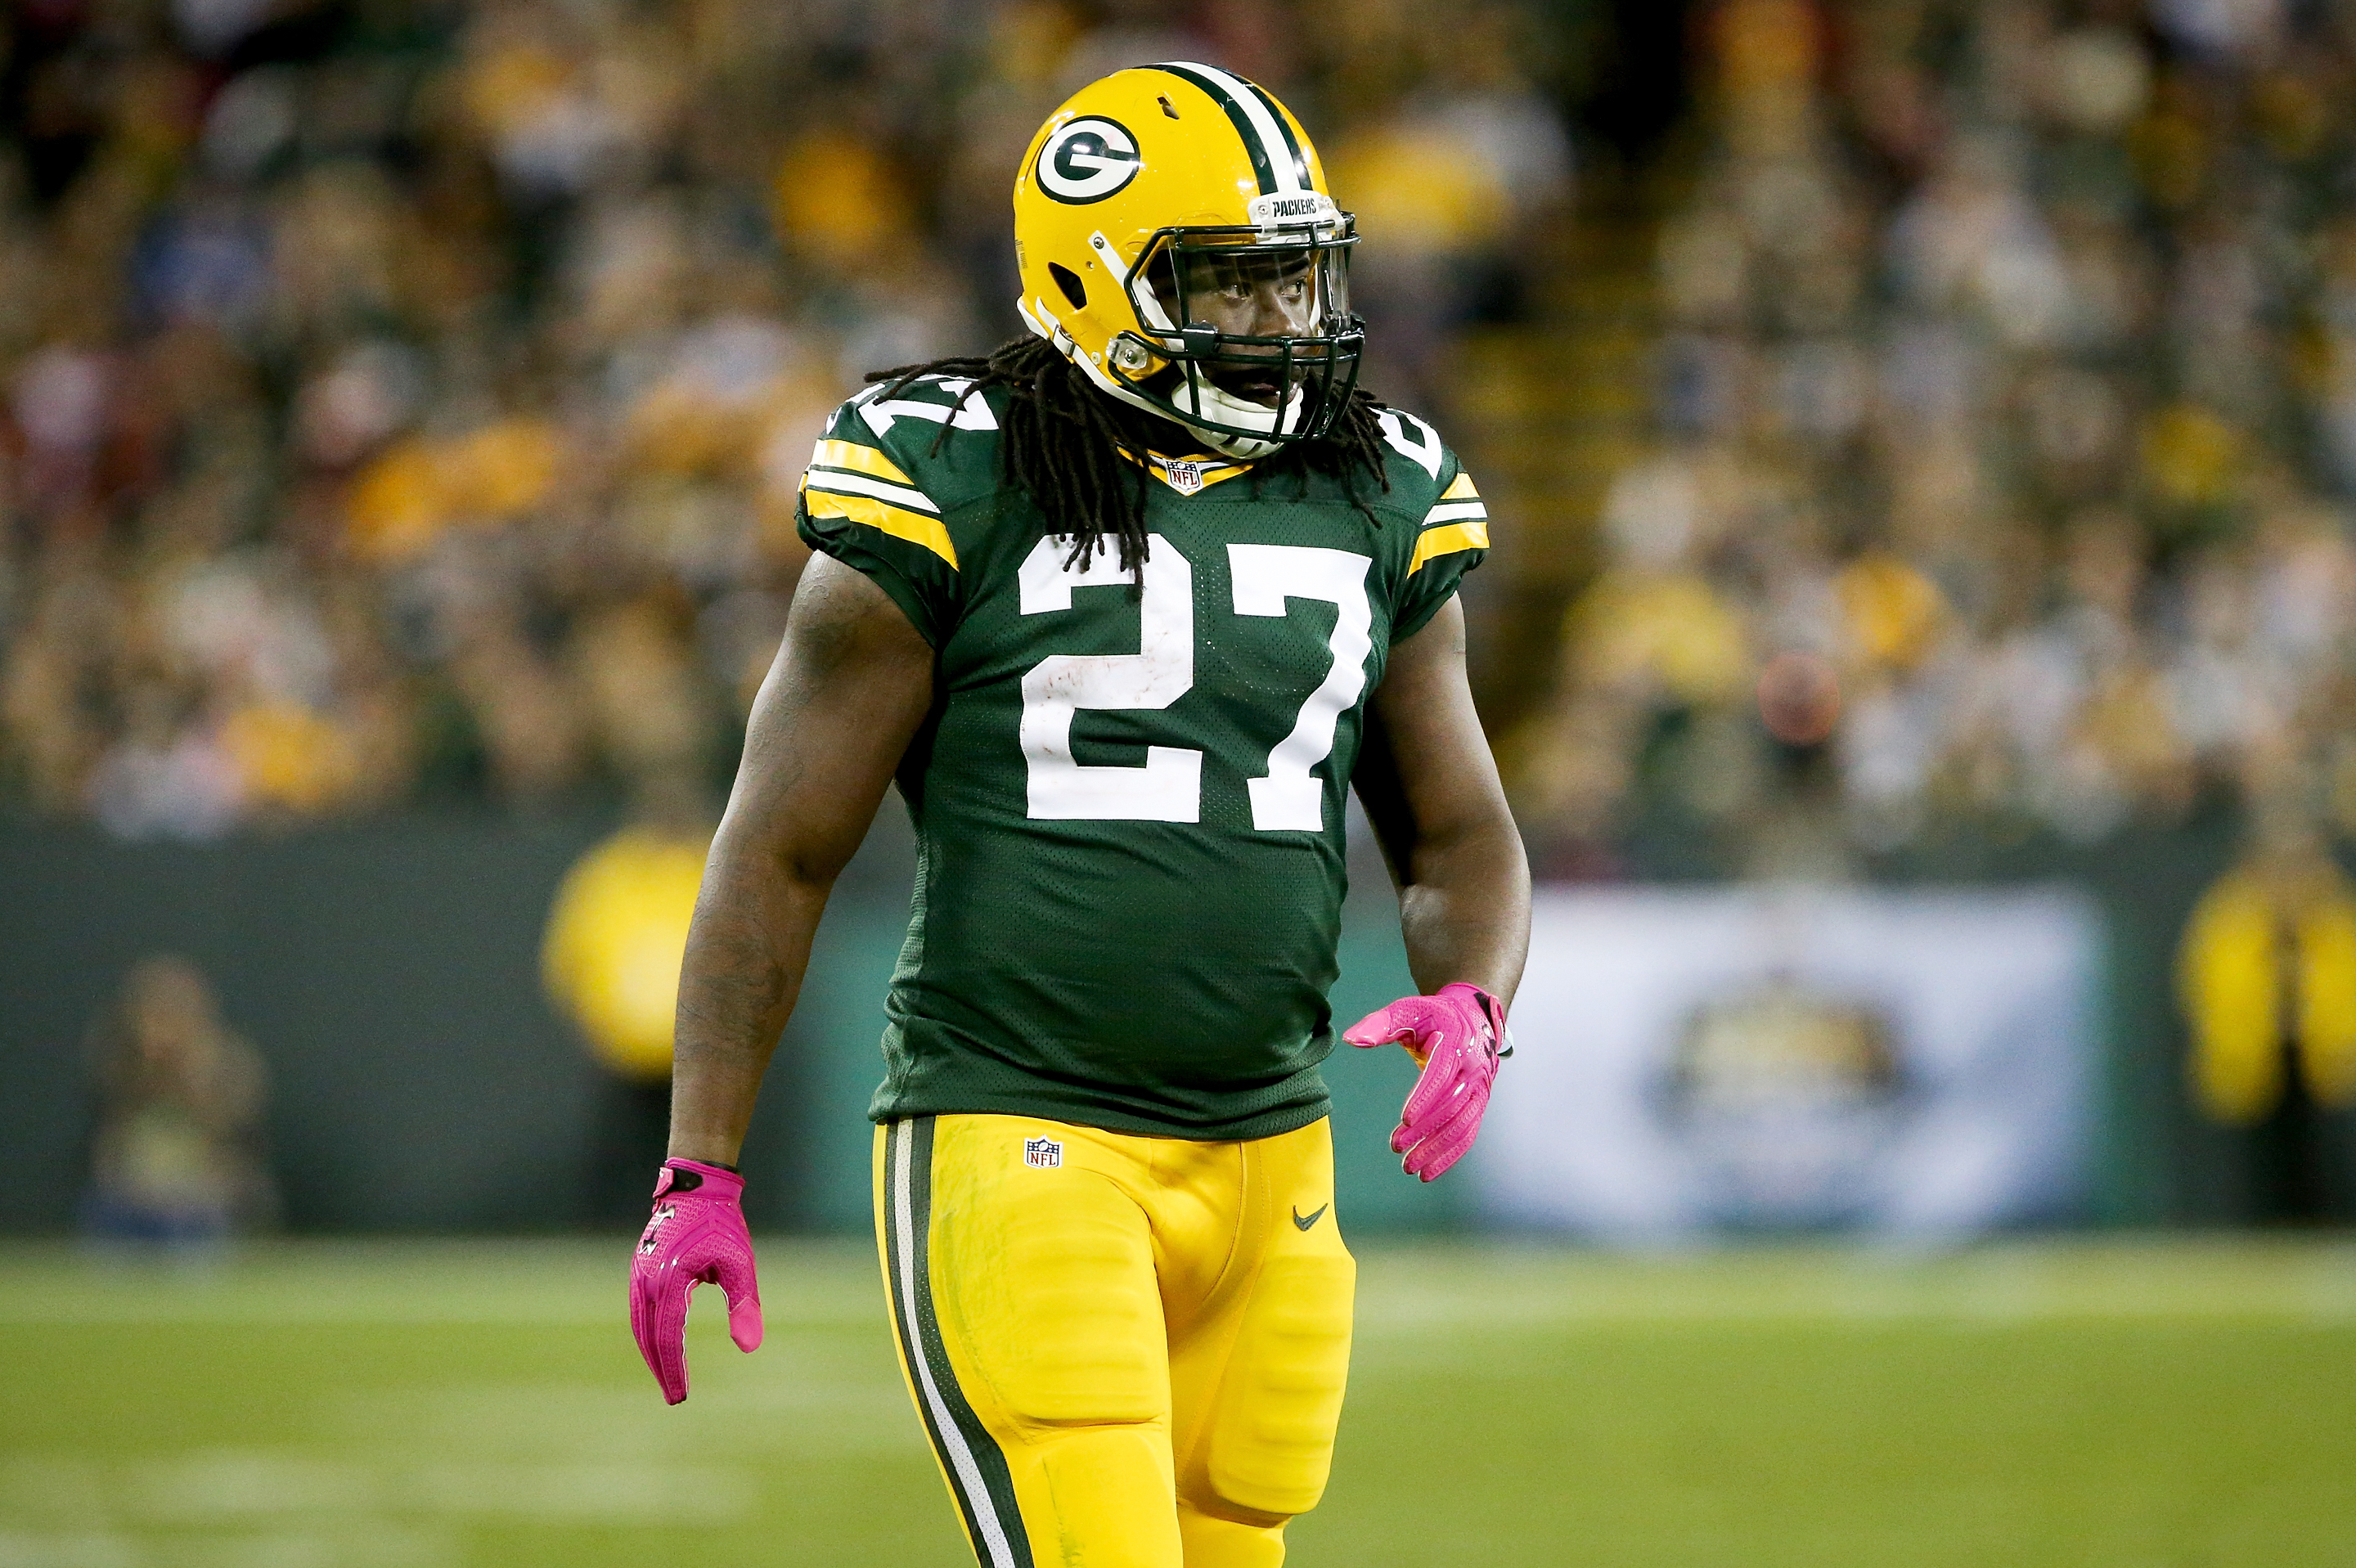 Eddie Lacy of the Green Bay Packers runs with the football during the  News Photo - Getty Images